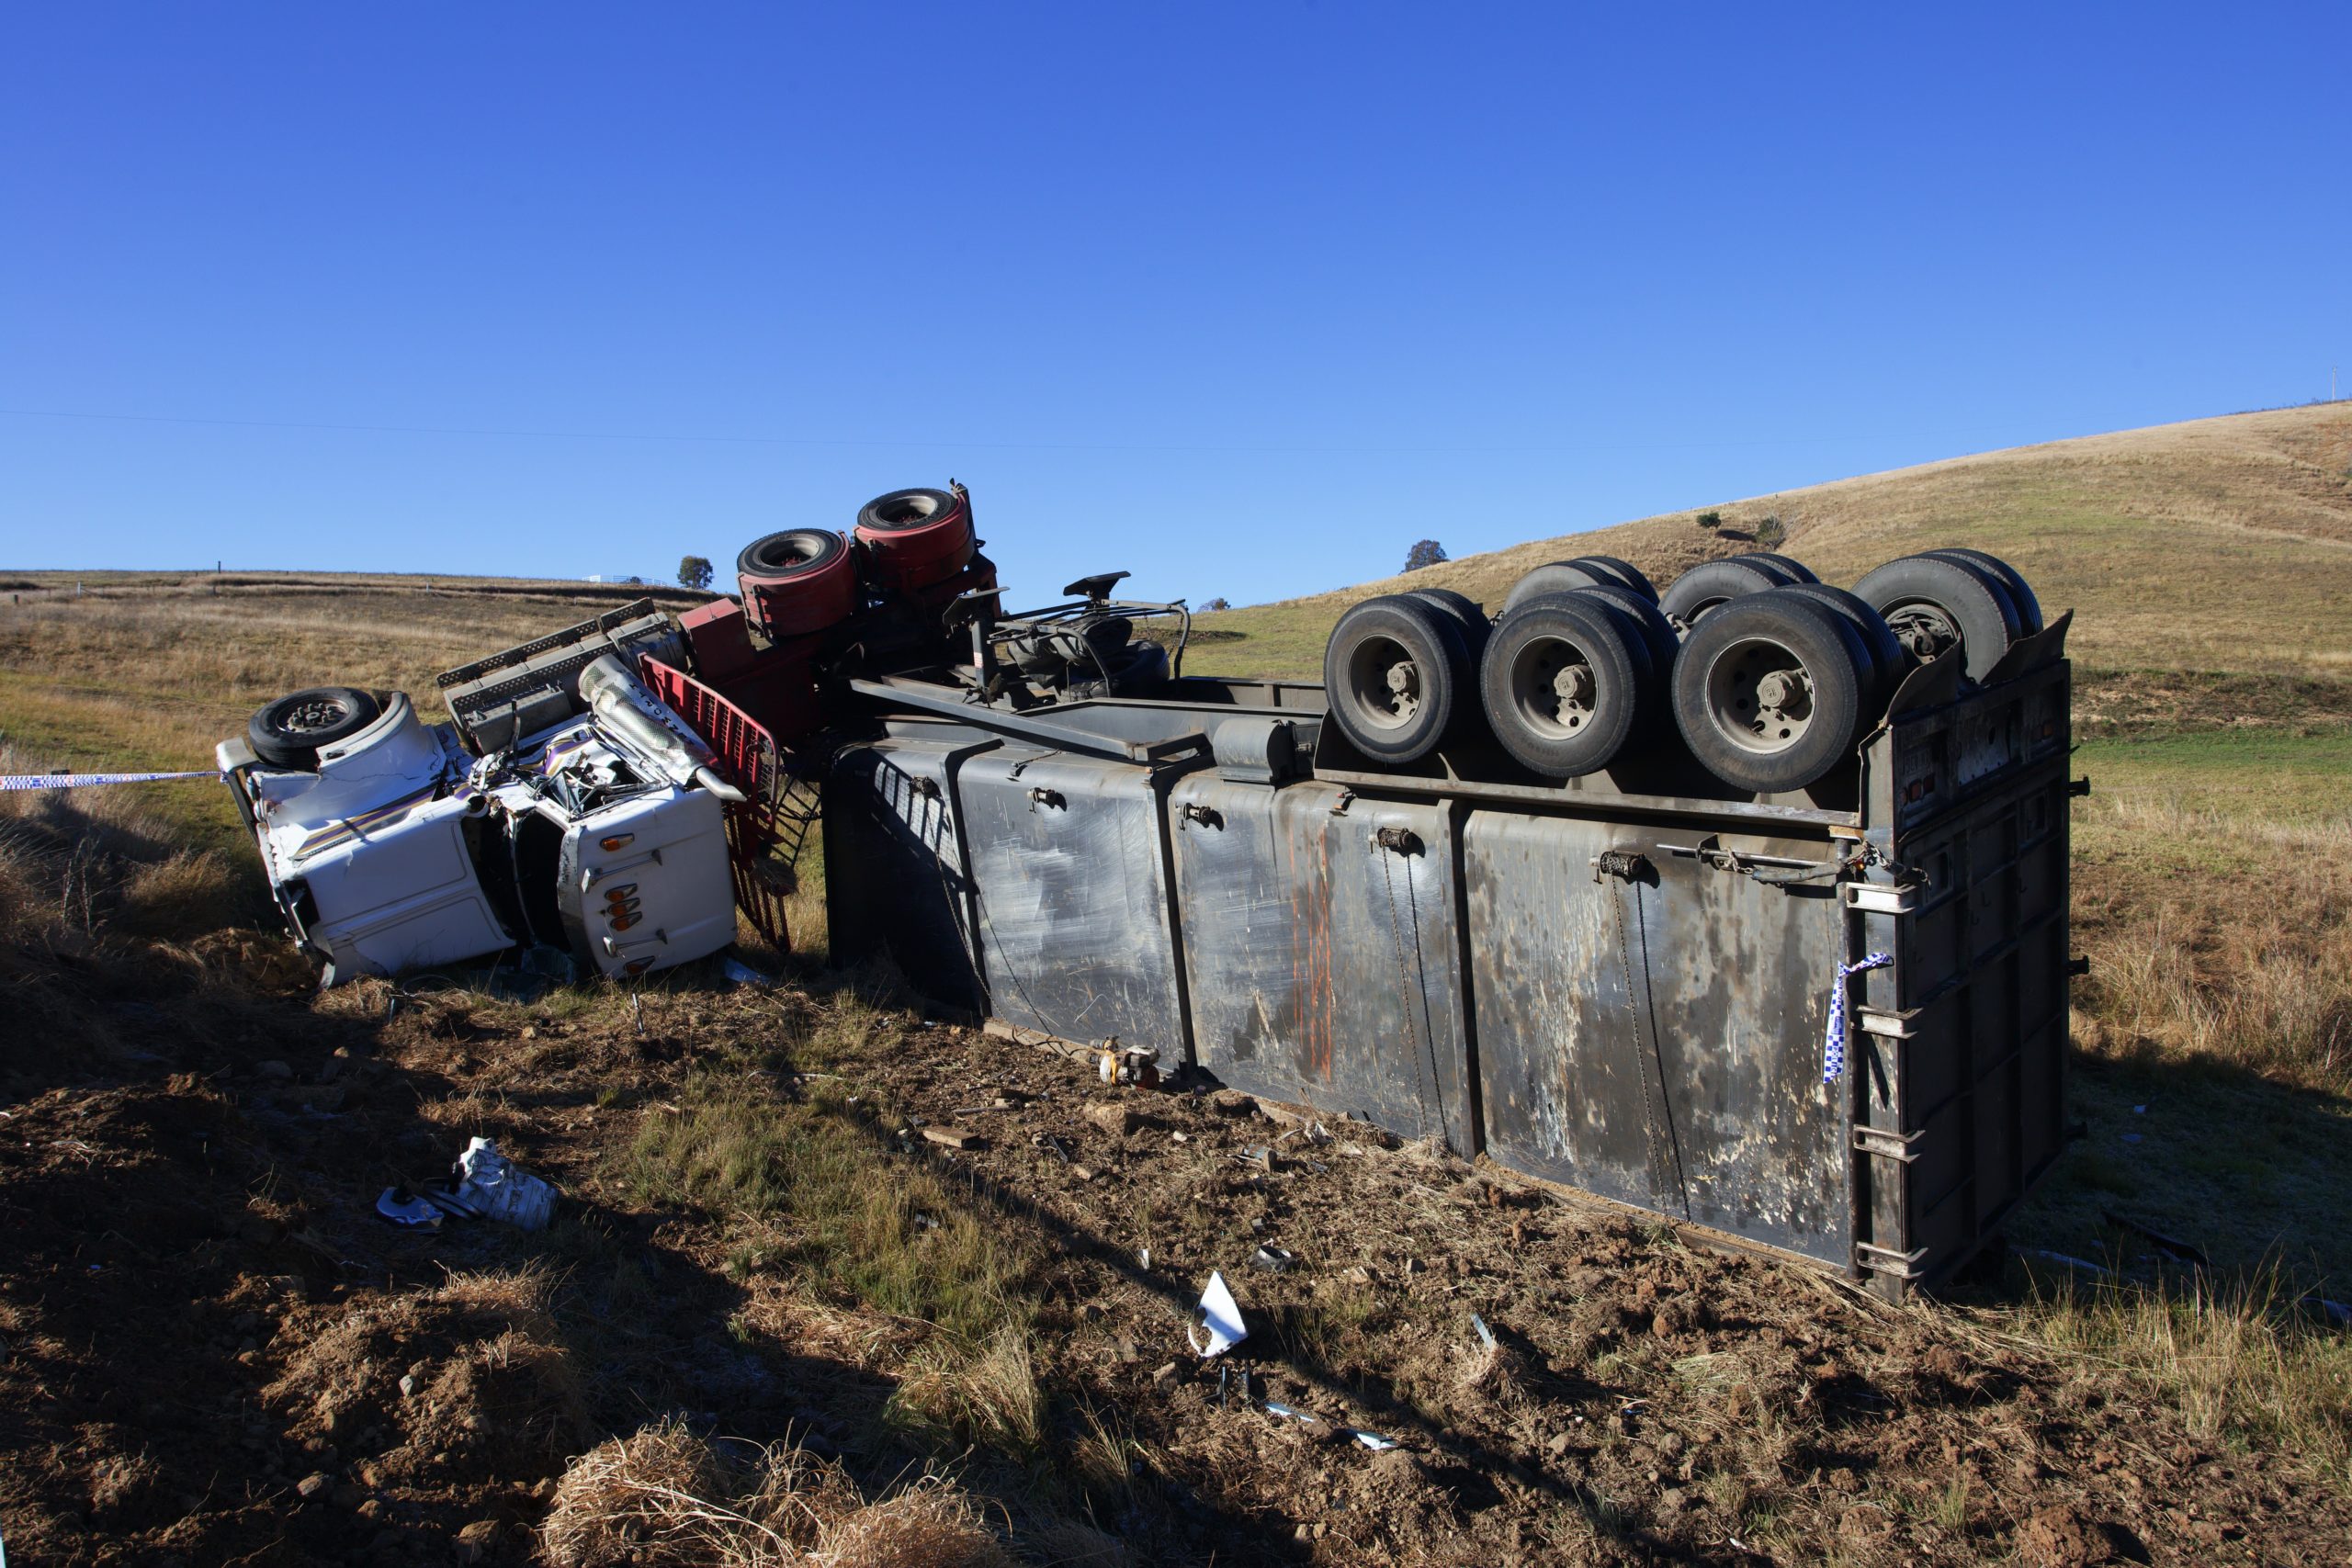 When Unsecured Loads Lead To Truck Accidents